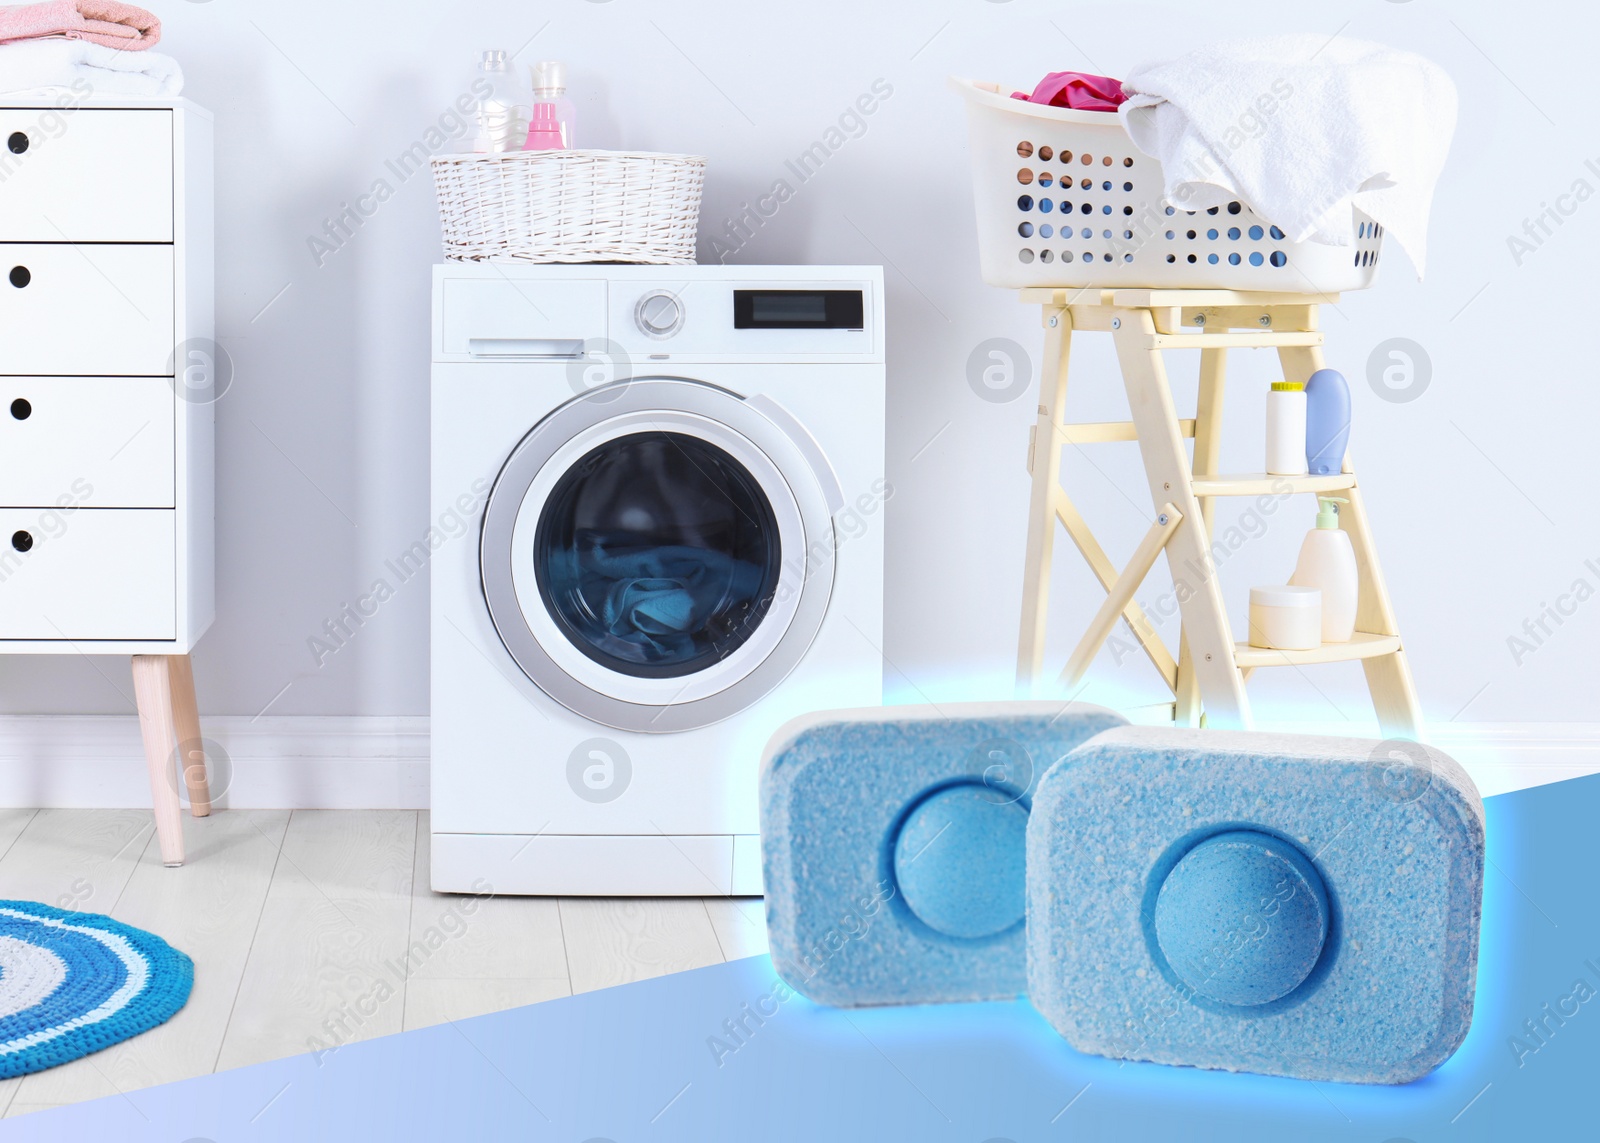 Image of  water softener tablets and modern washing machine in laundry room